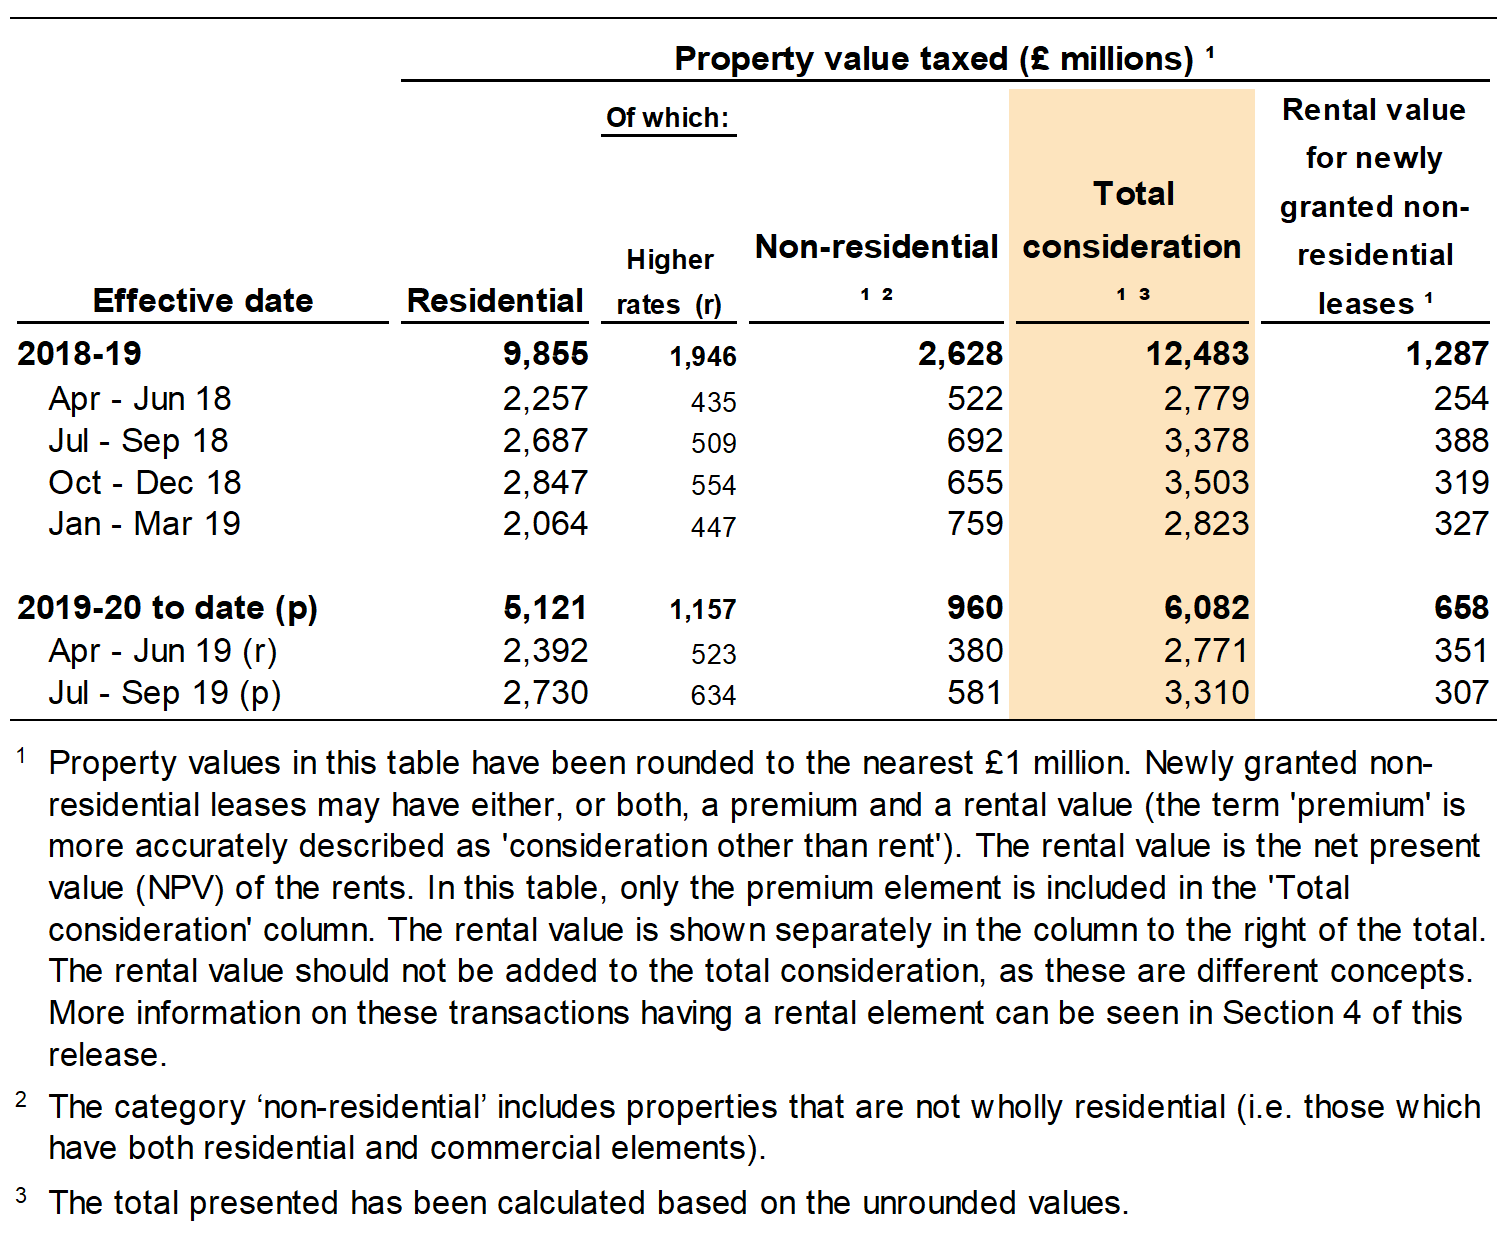 Figure 2.3 shows the value of properties subject to LTT, by the quarter and year in which the transactions were effective. Figure 2.3 also shows a breakdown for residential and non-residential transactions, and separate figures for the rental value of newly granted non-residential leases.